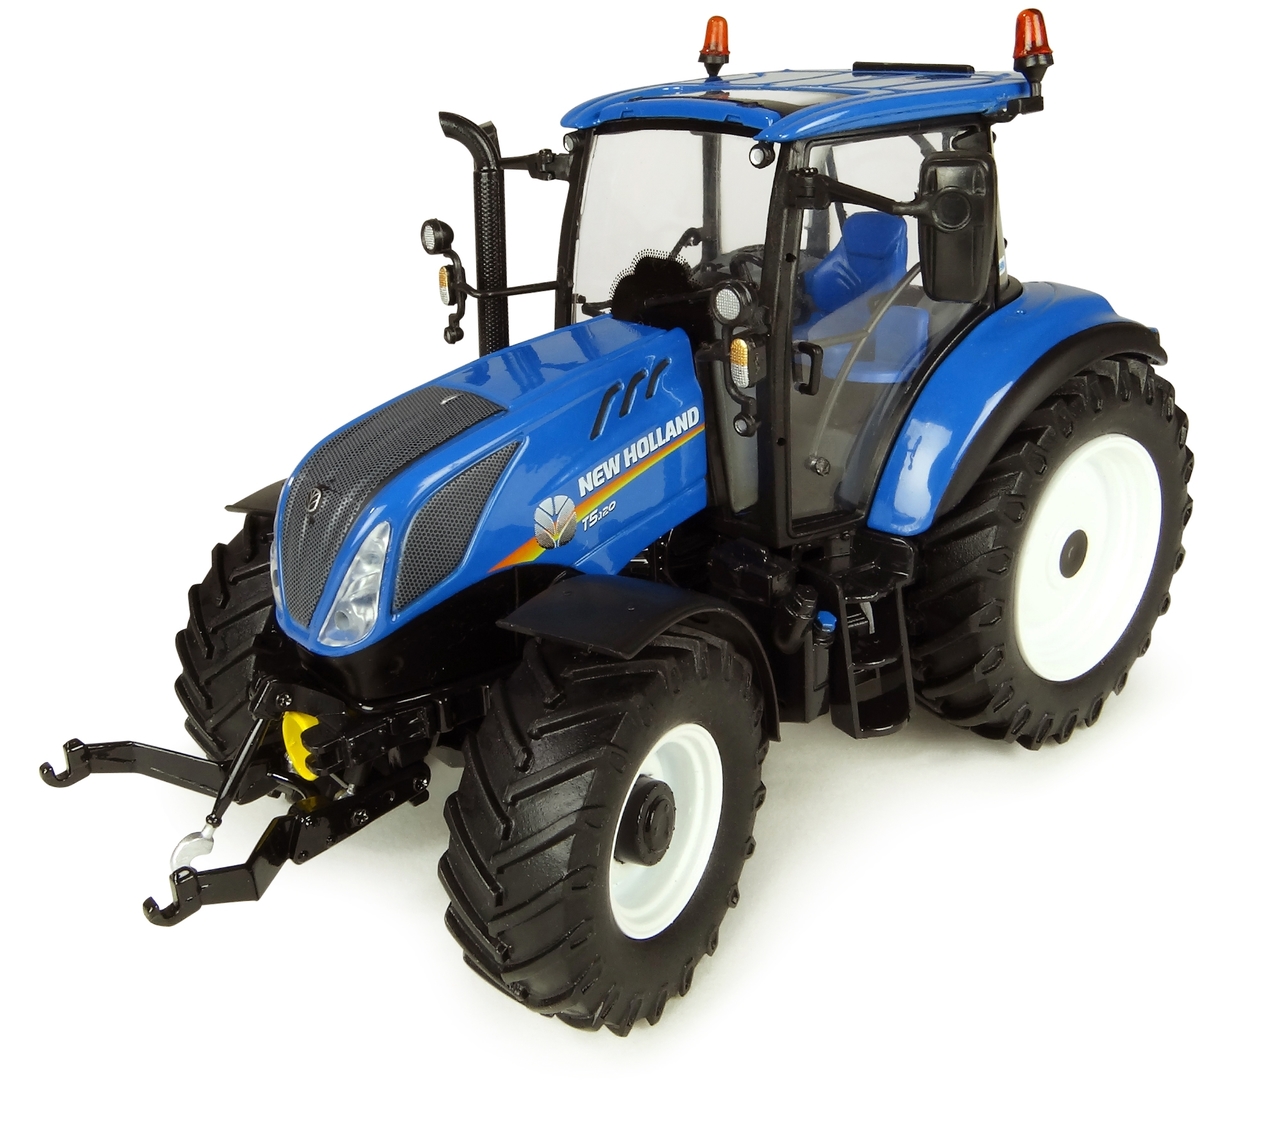 New Holland T5.120 Tractor 1/32 Diecast Model By Universal Hobbies